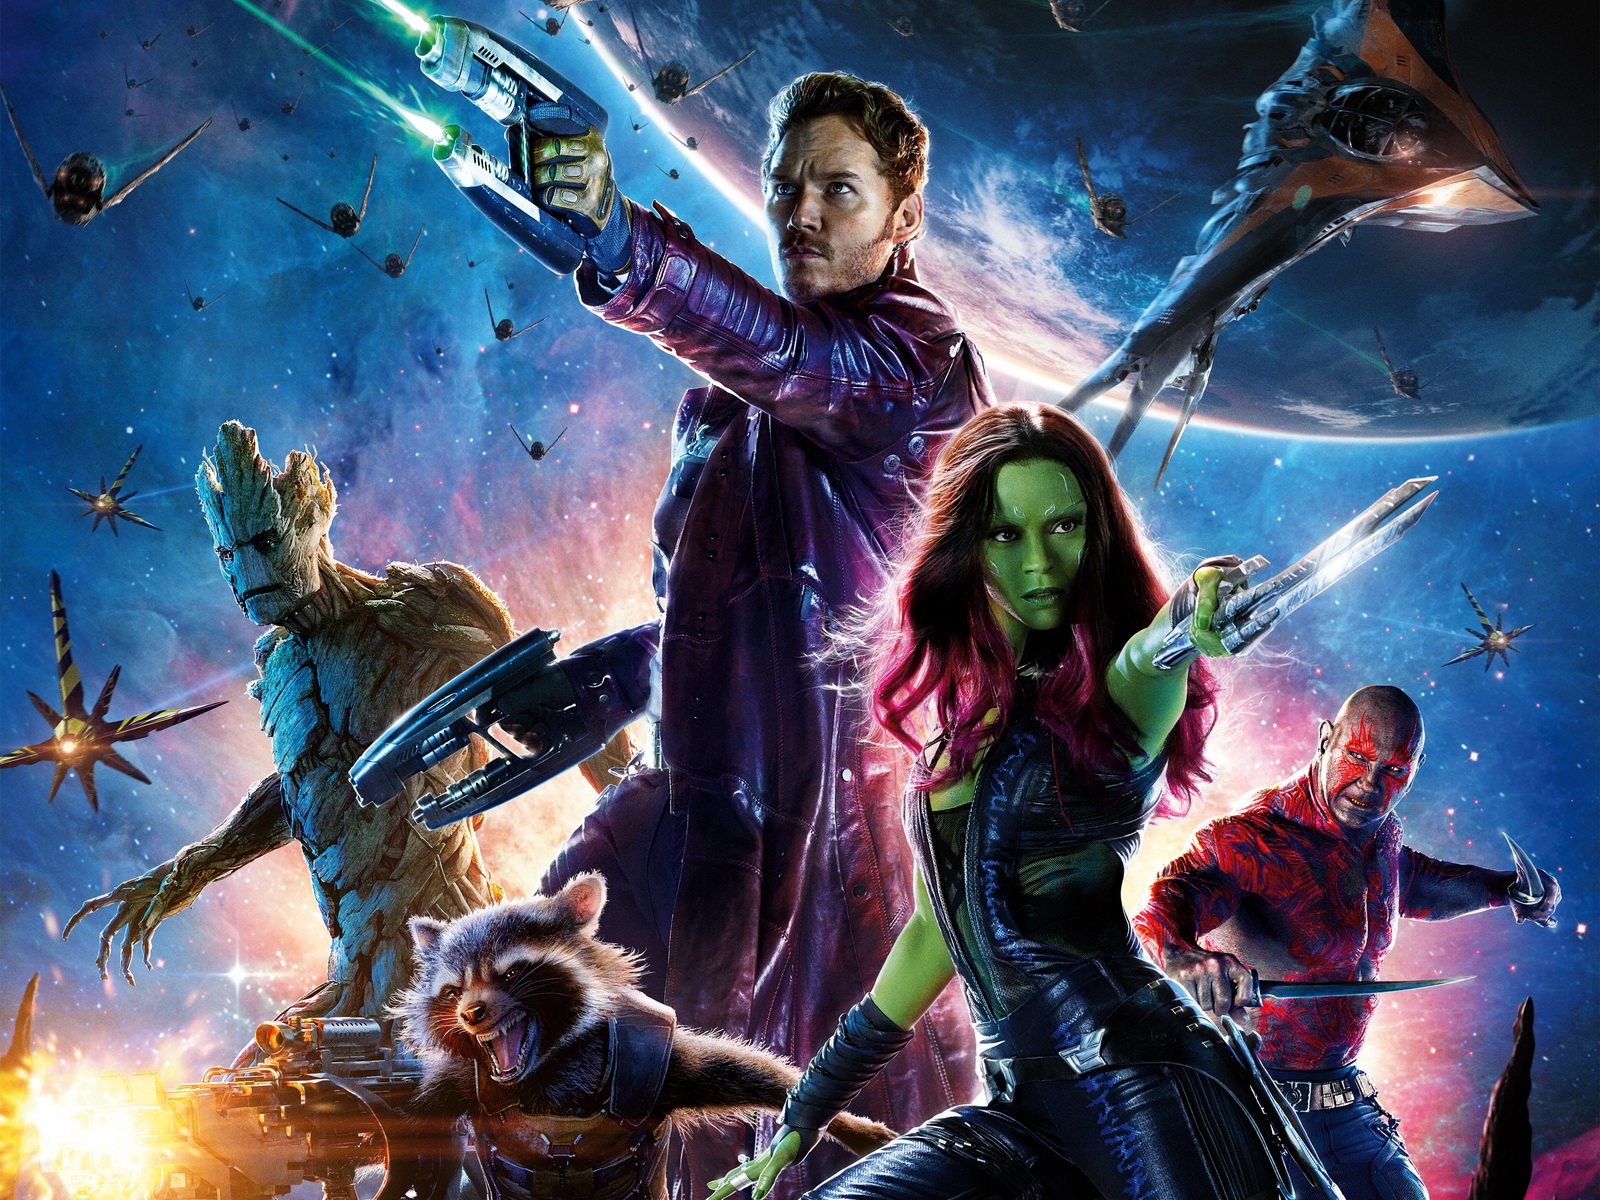 Download High quality Guardians of the Galaxy wallpaper / Movies / 1600x1200